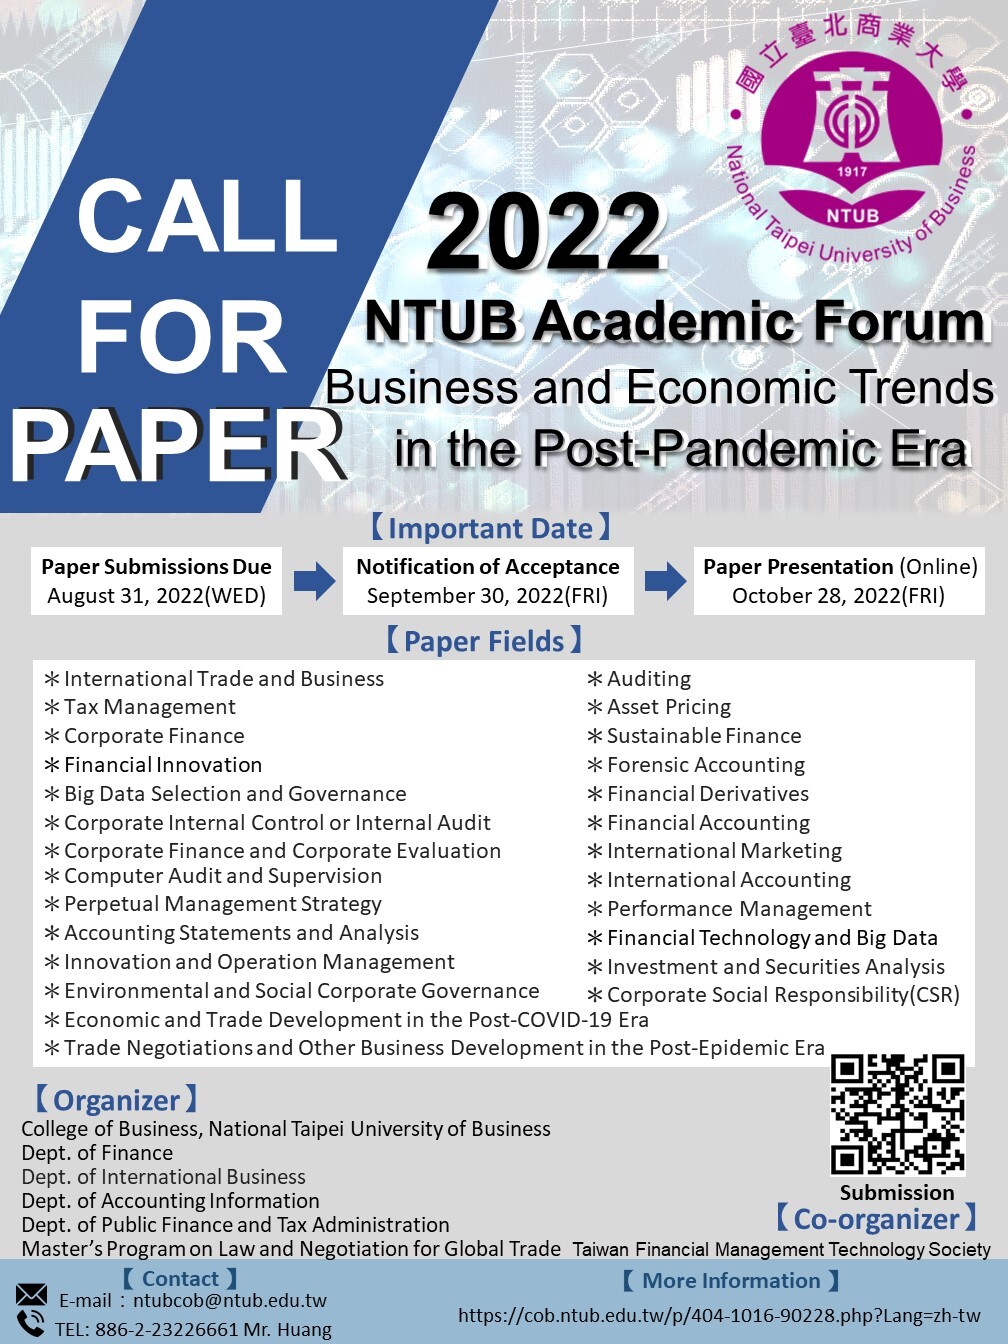 [ENG] CALL FOR PAPERS